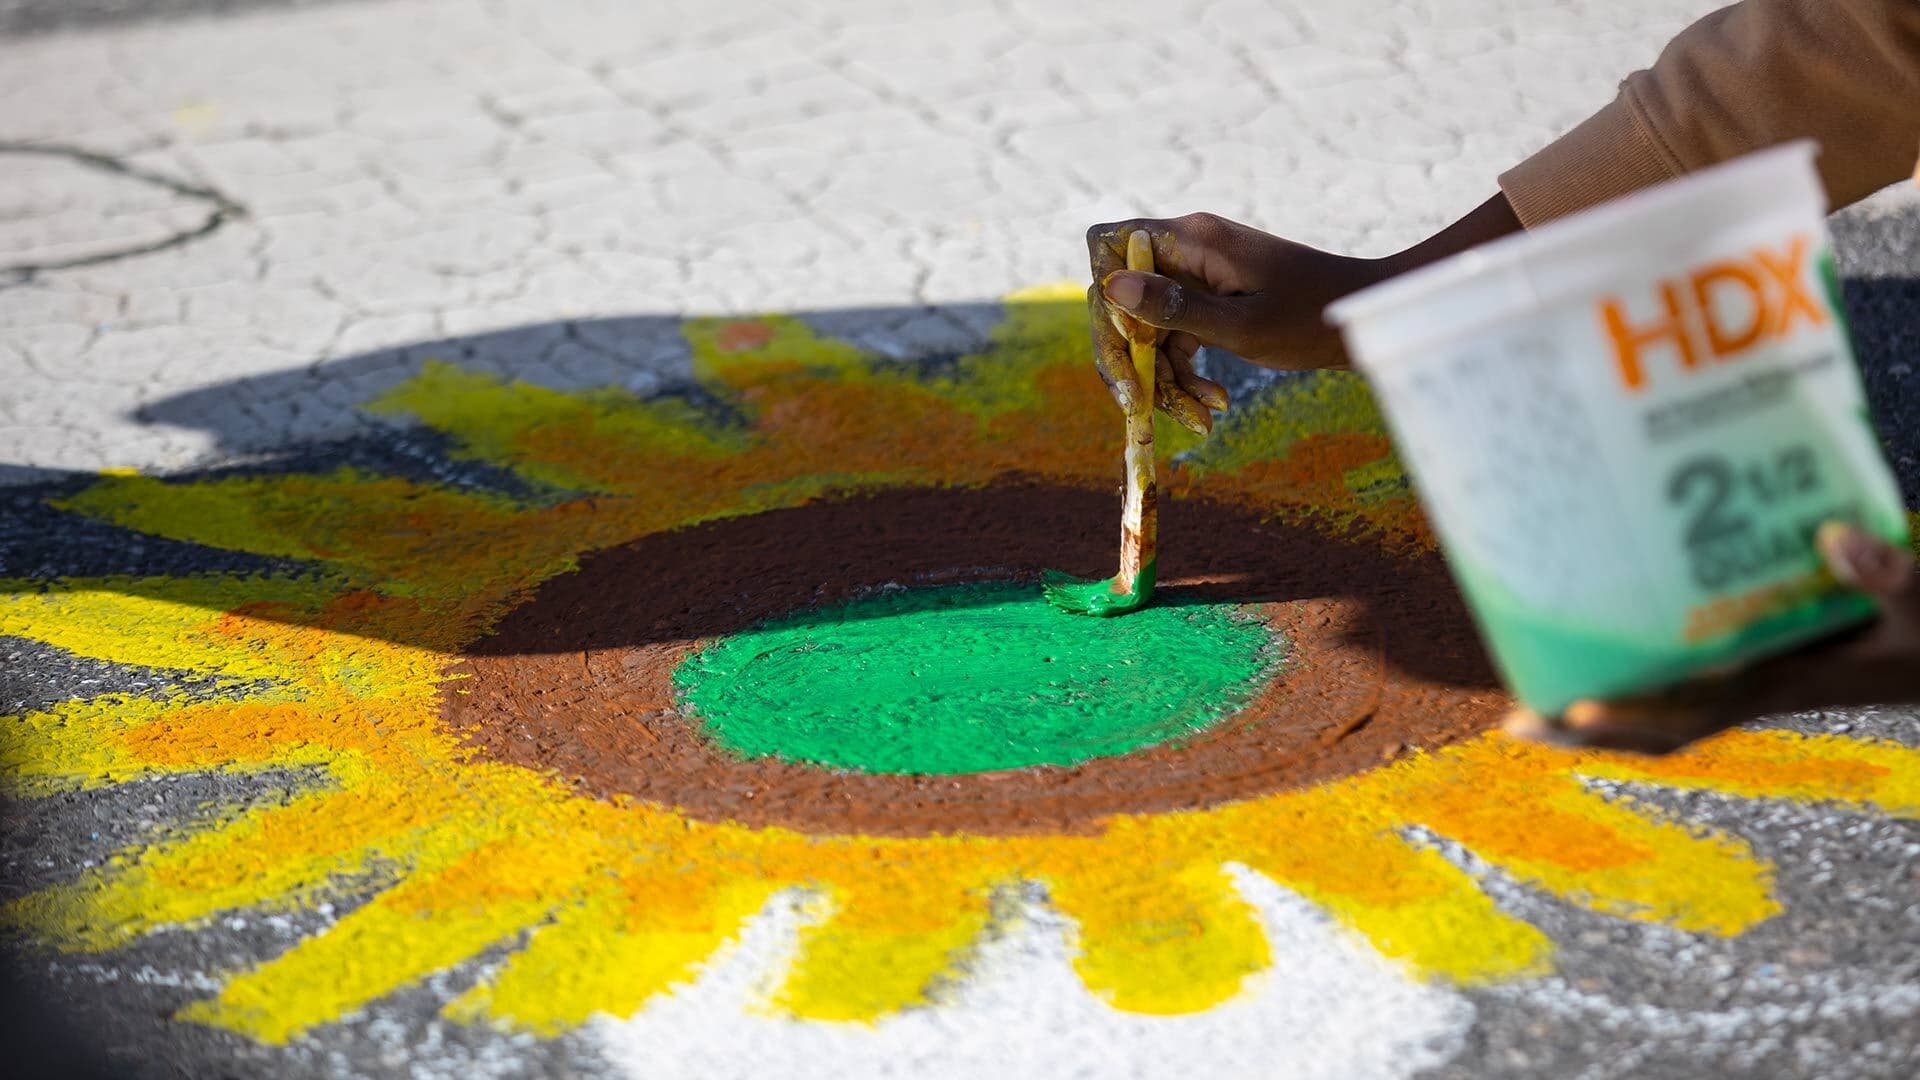 a person's hand is shown painting a sunflower on the street